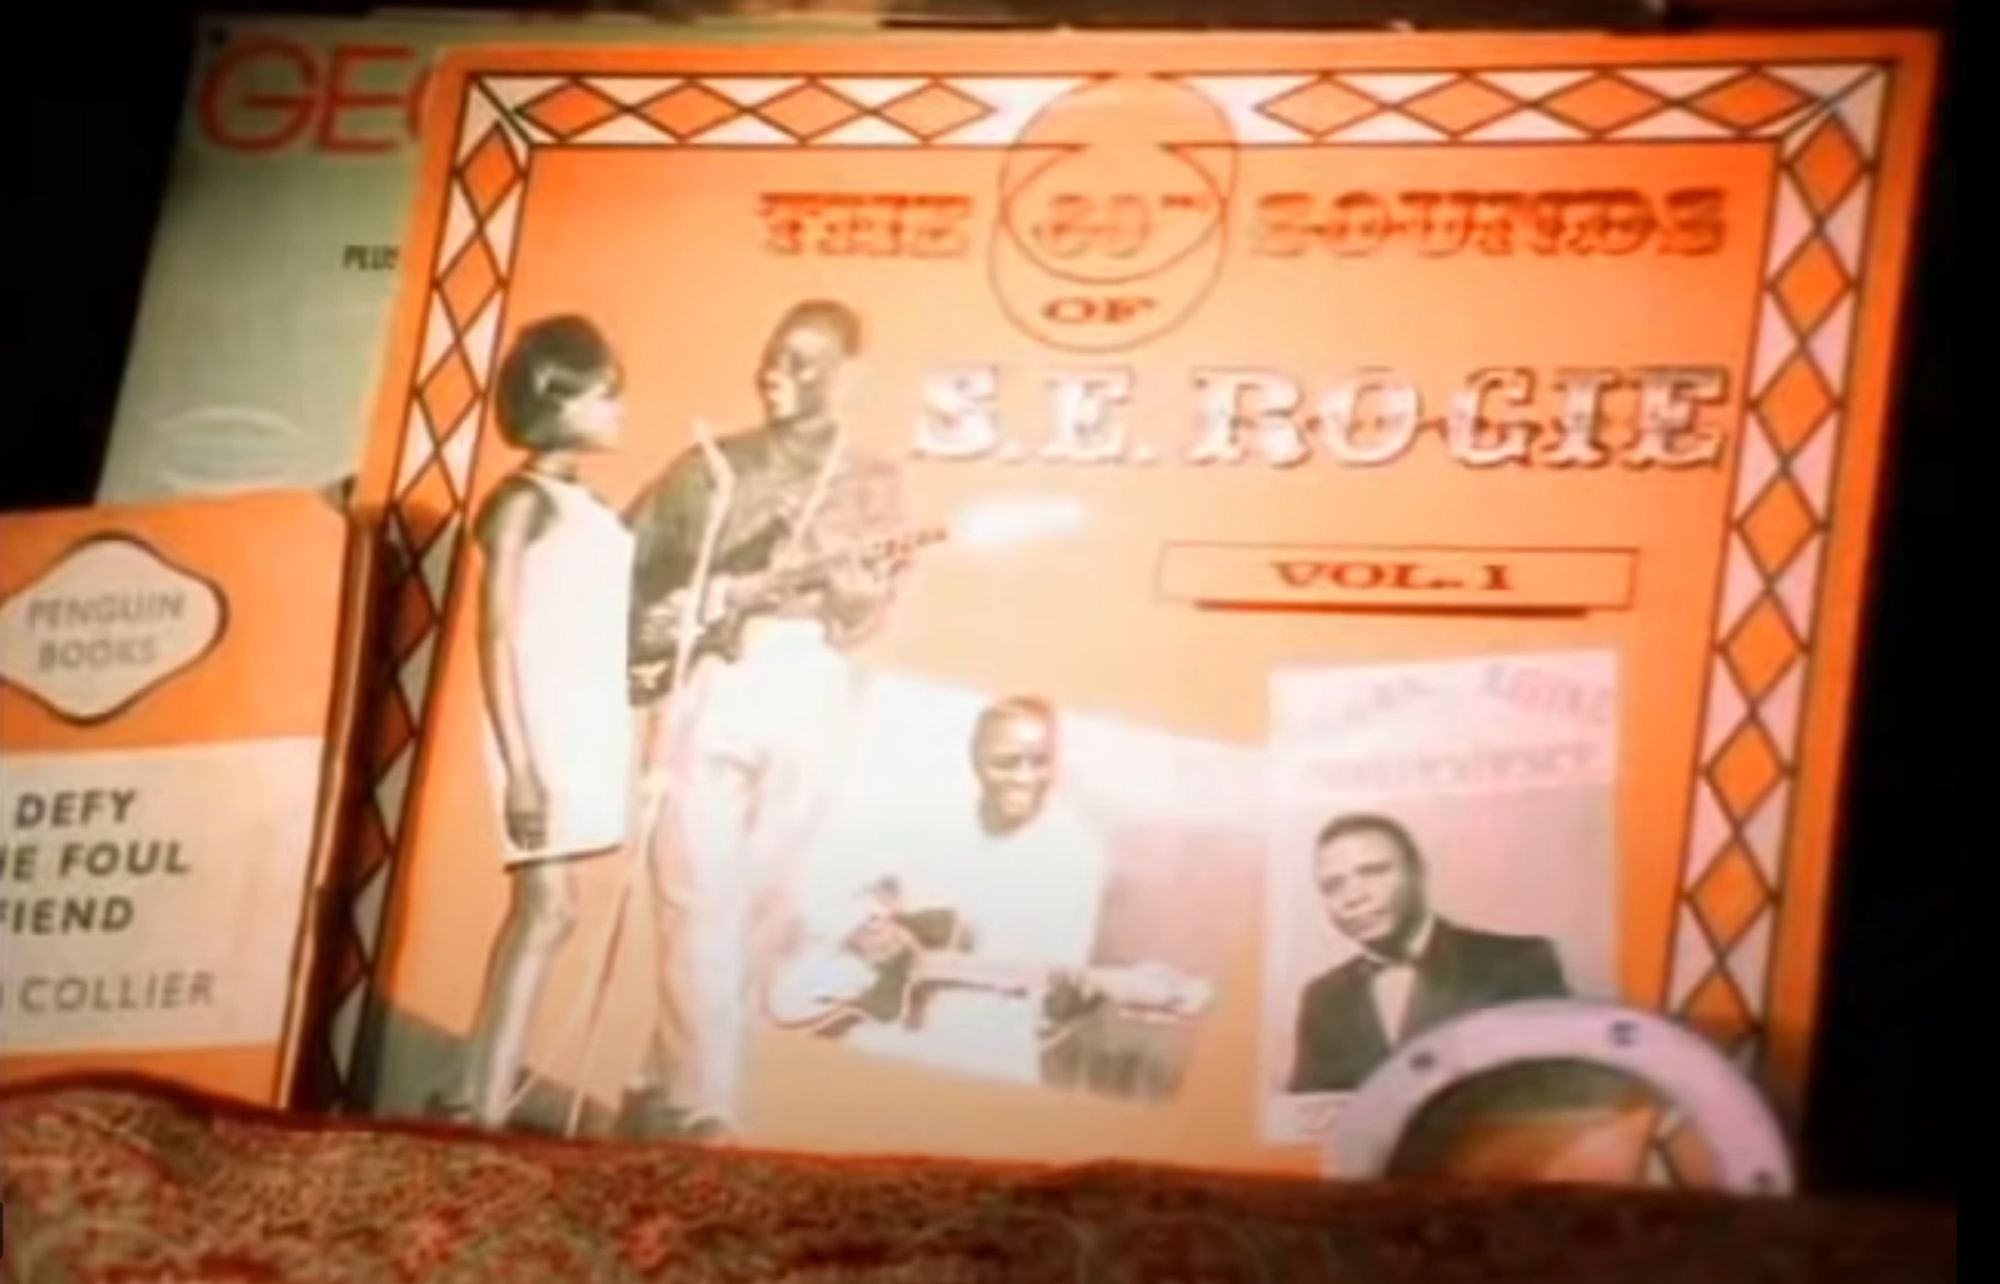 A screenshot of an orange vinyl cover with S.E. Rogie on it